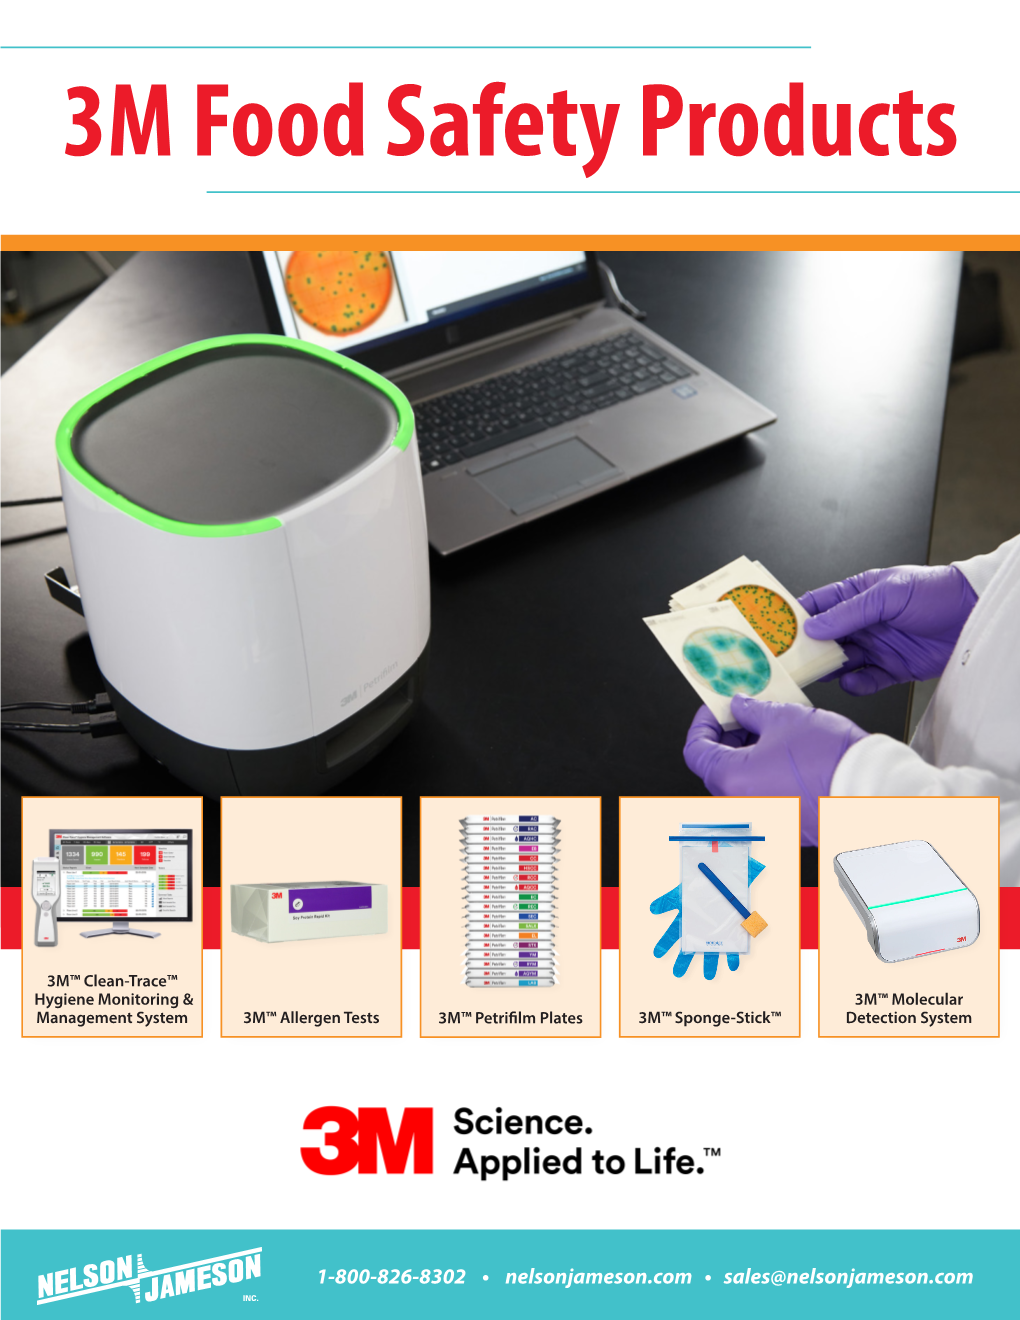 3M Food Safety Products